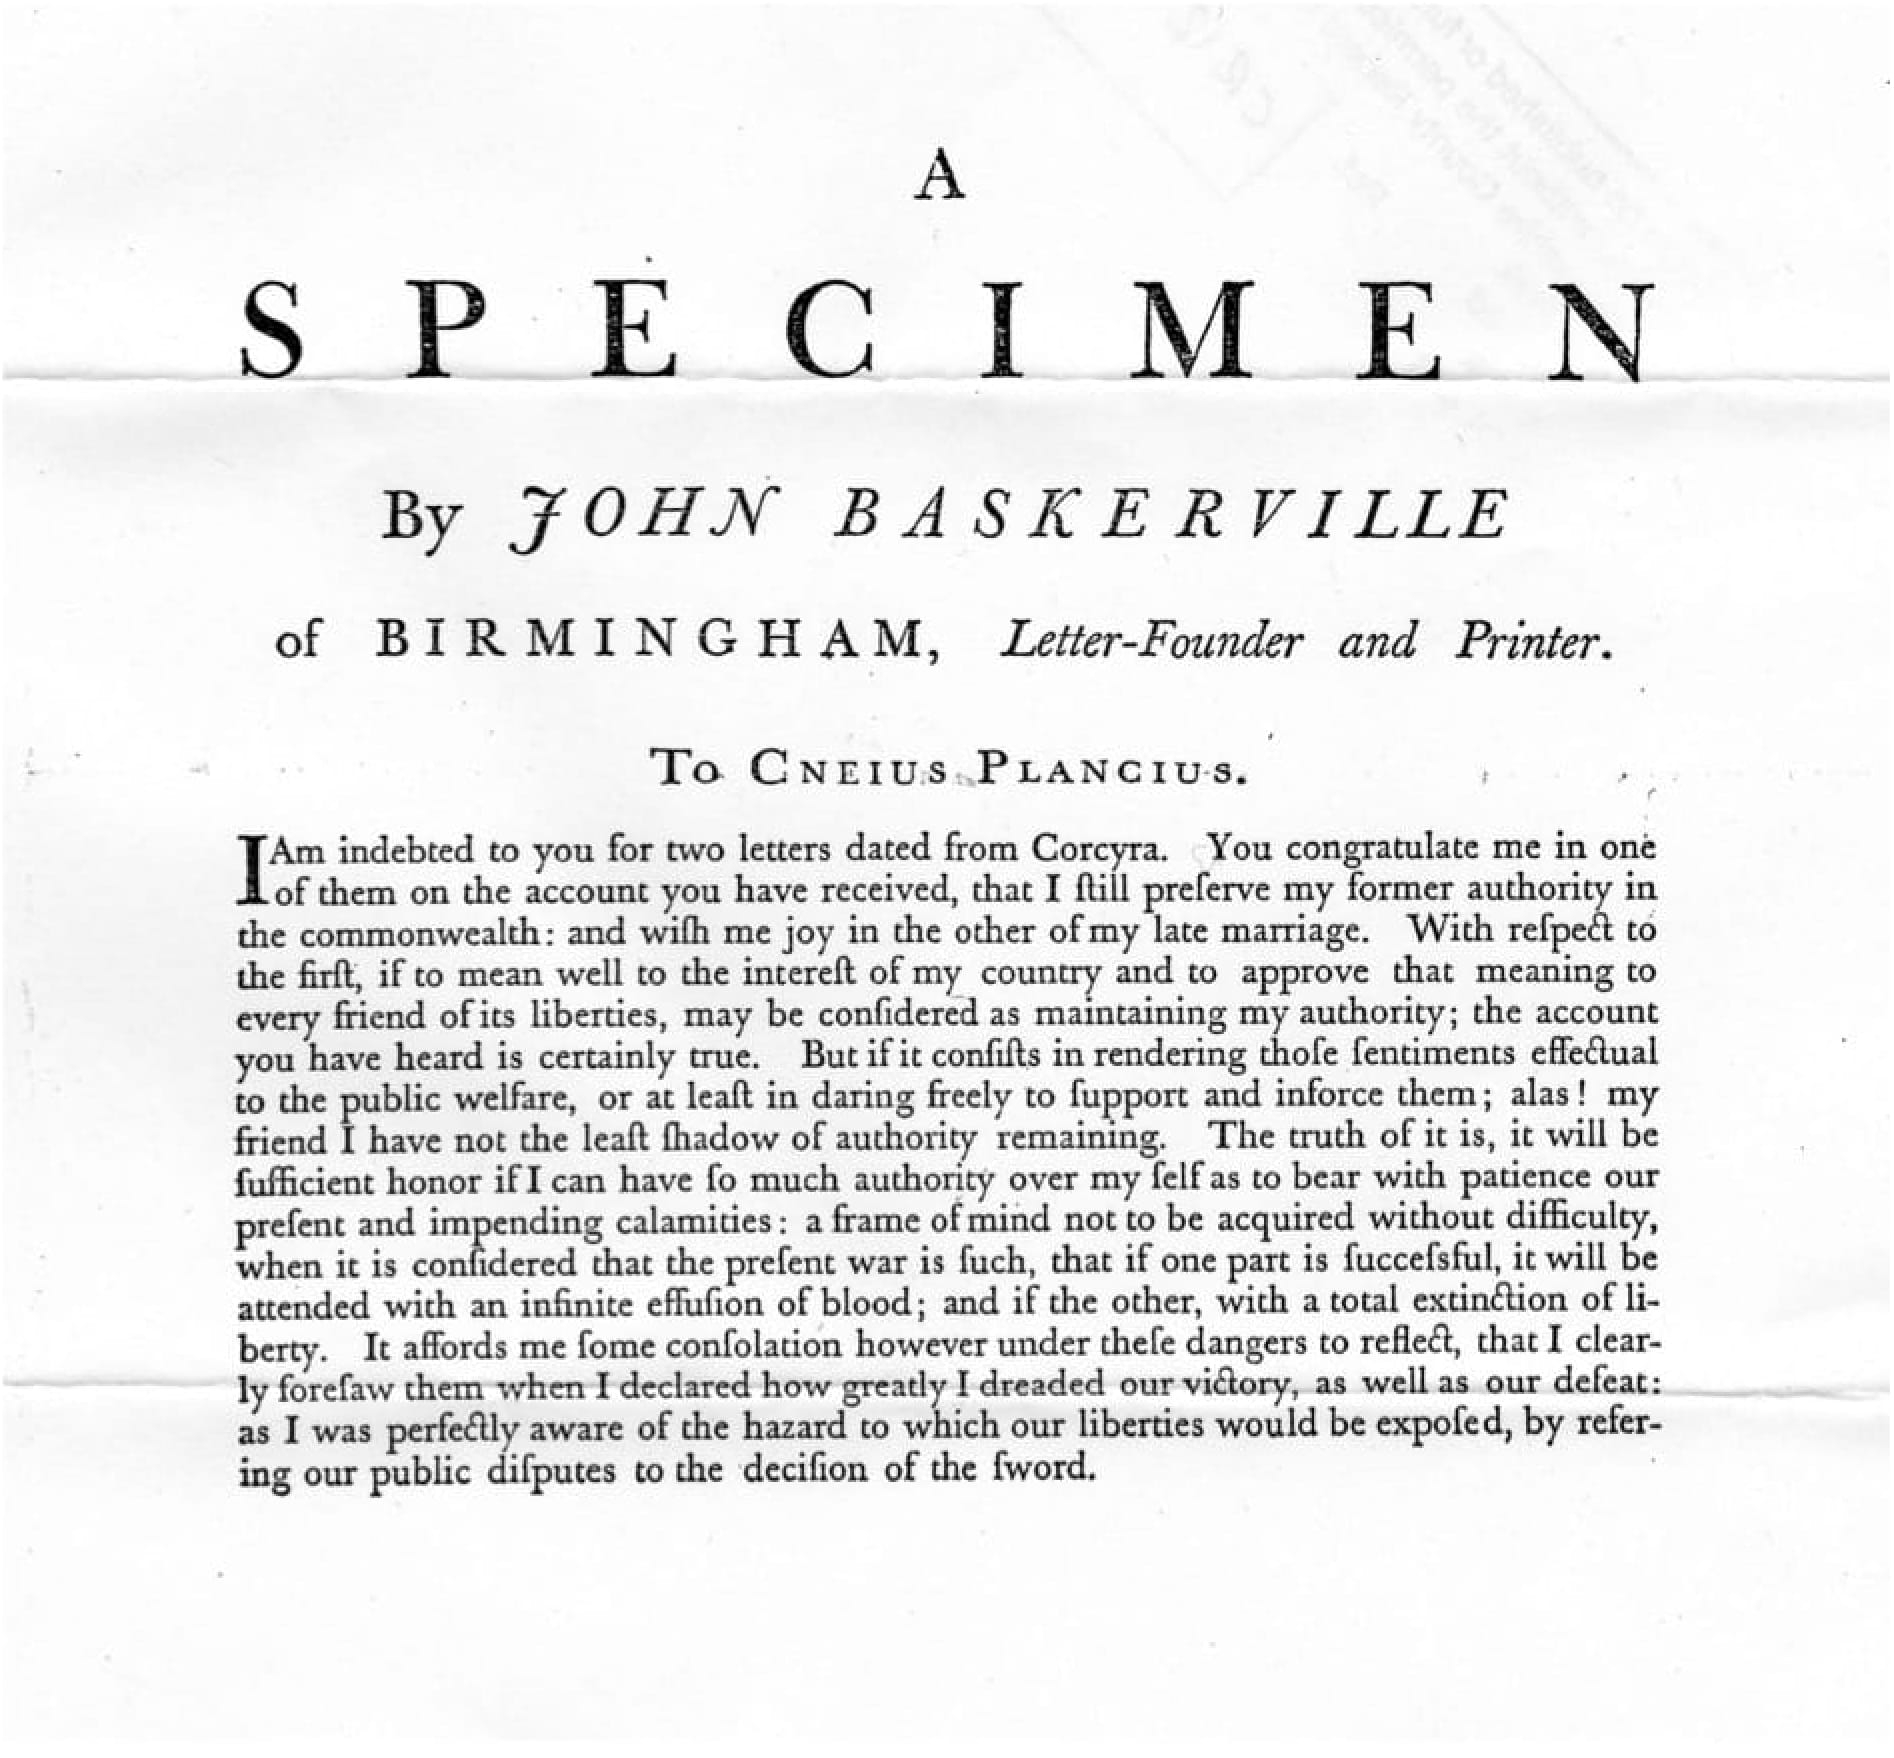 18th century typographic work in a single font—Baskerville—by John Baskerville himself.